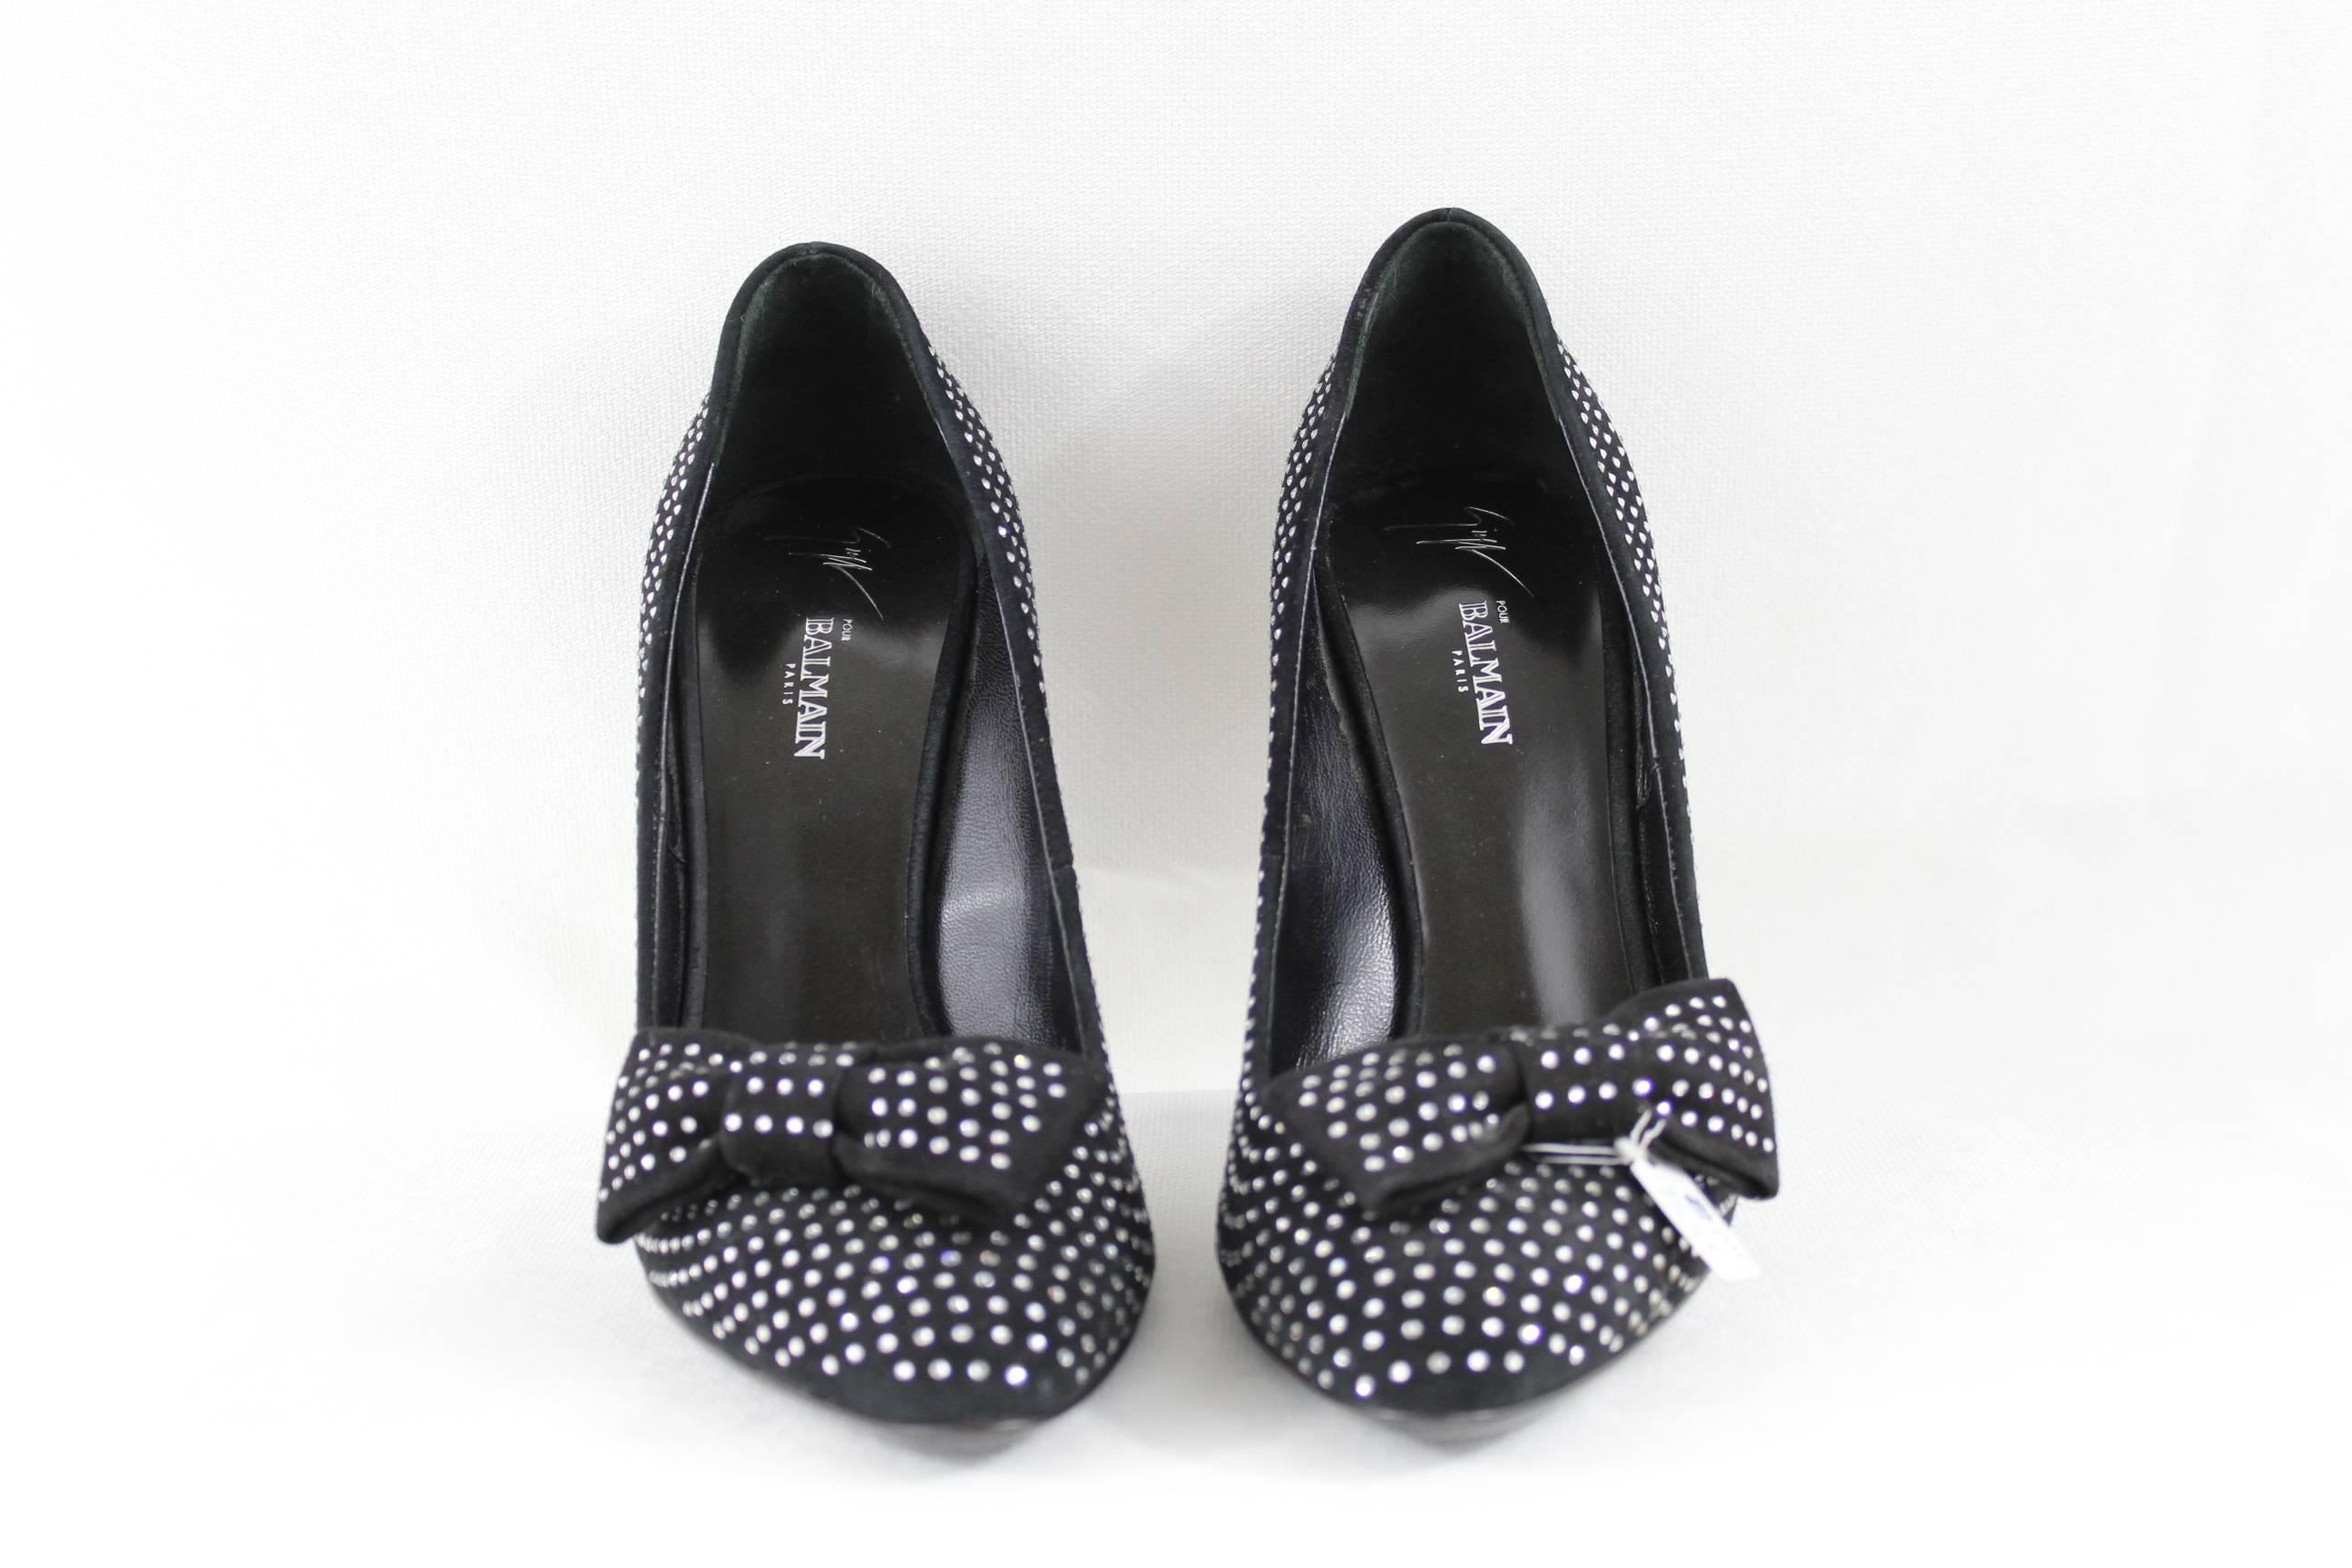 Women's Balmain Shoes with Swarovsky Crystals Designed by Giuseppe Zanotti. S.38 For Sale